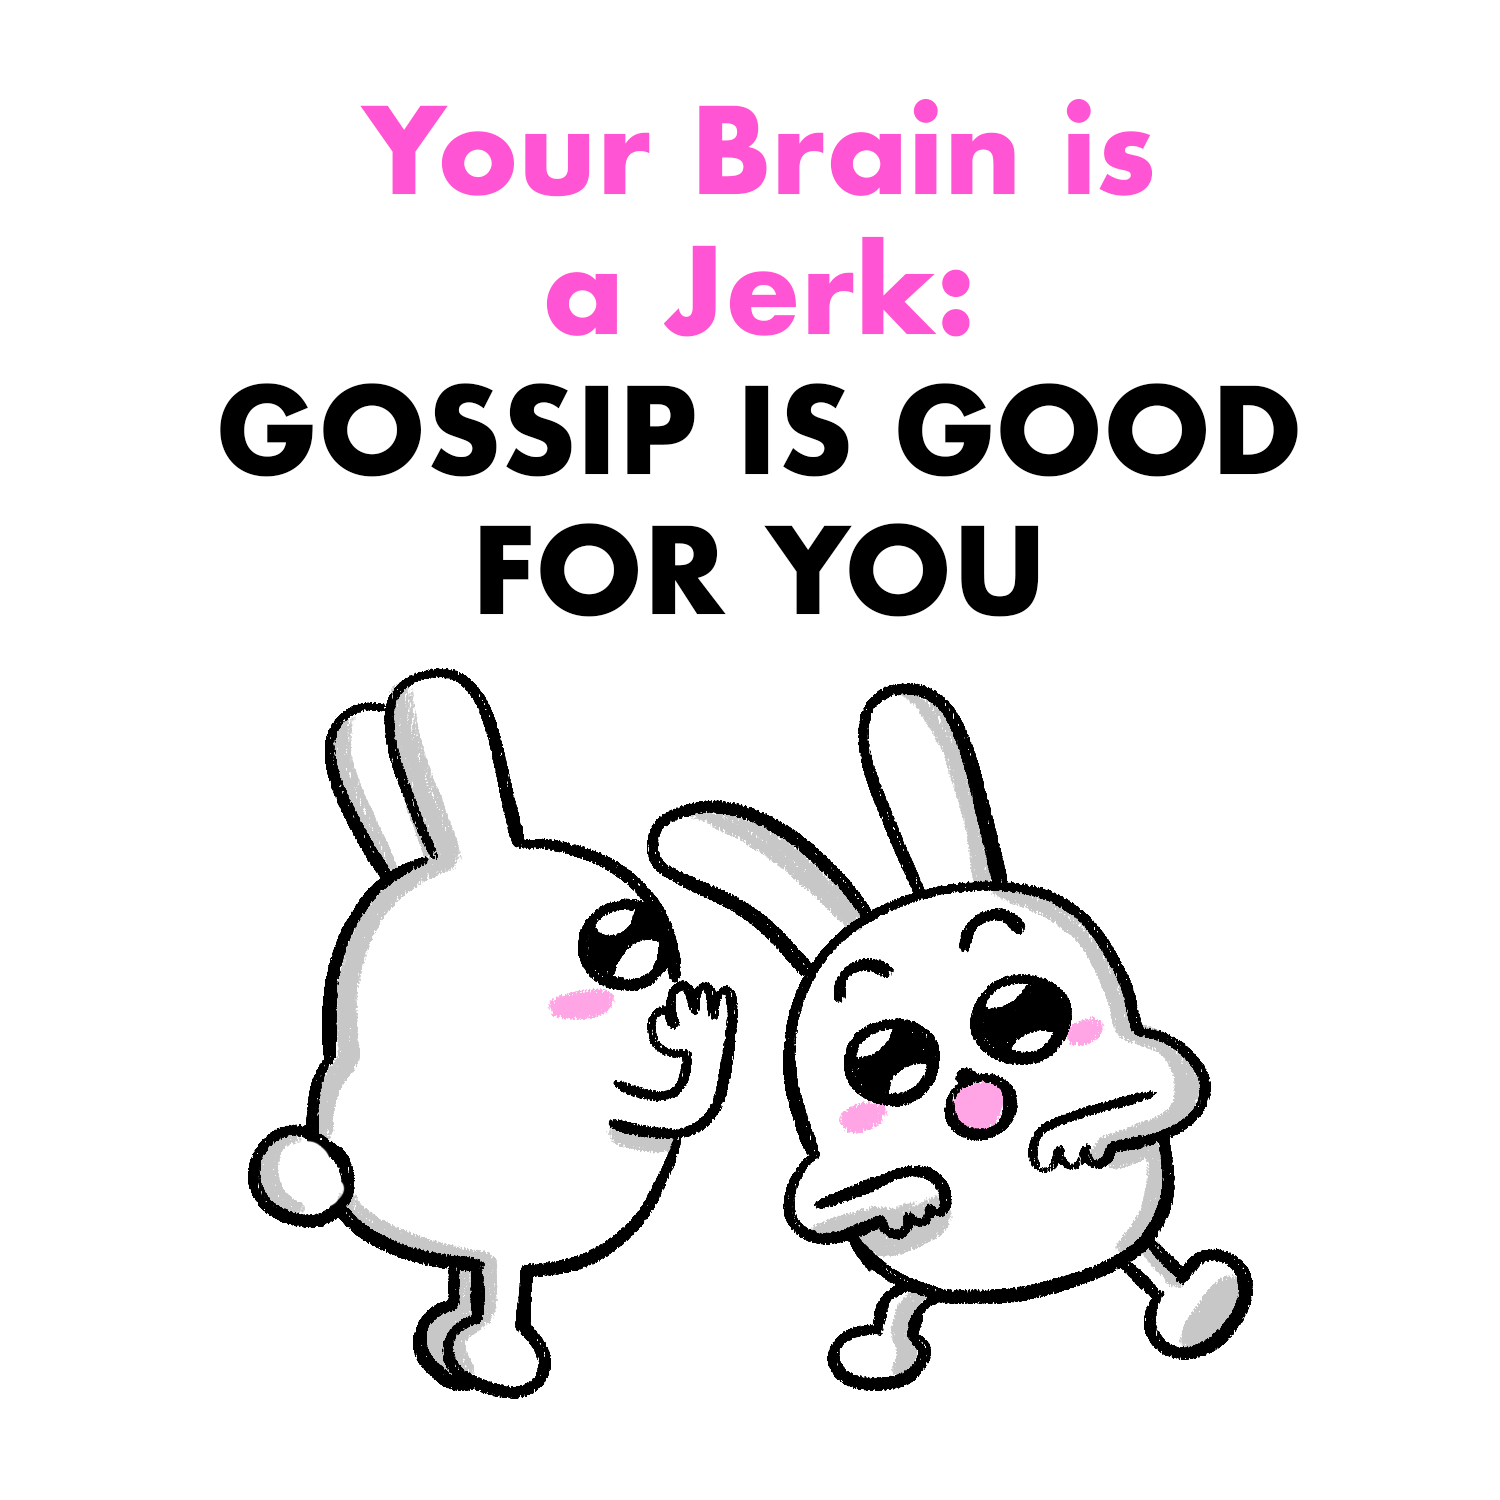 Your Brain is a Jerk: You're Wired for Gossip